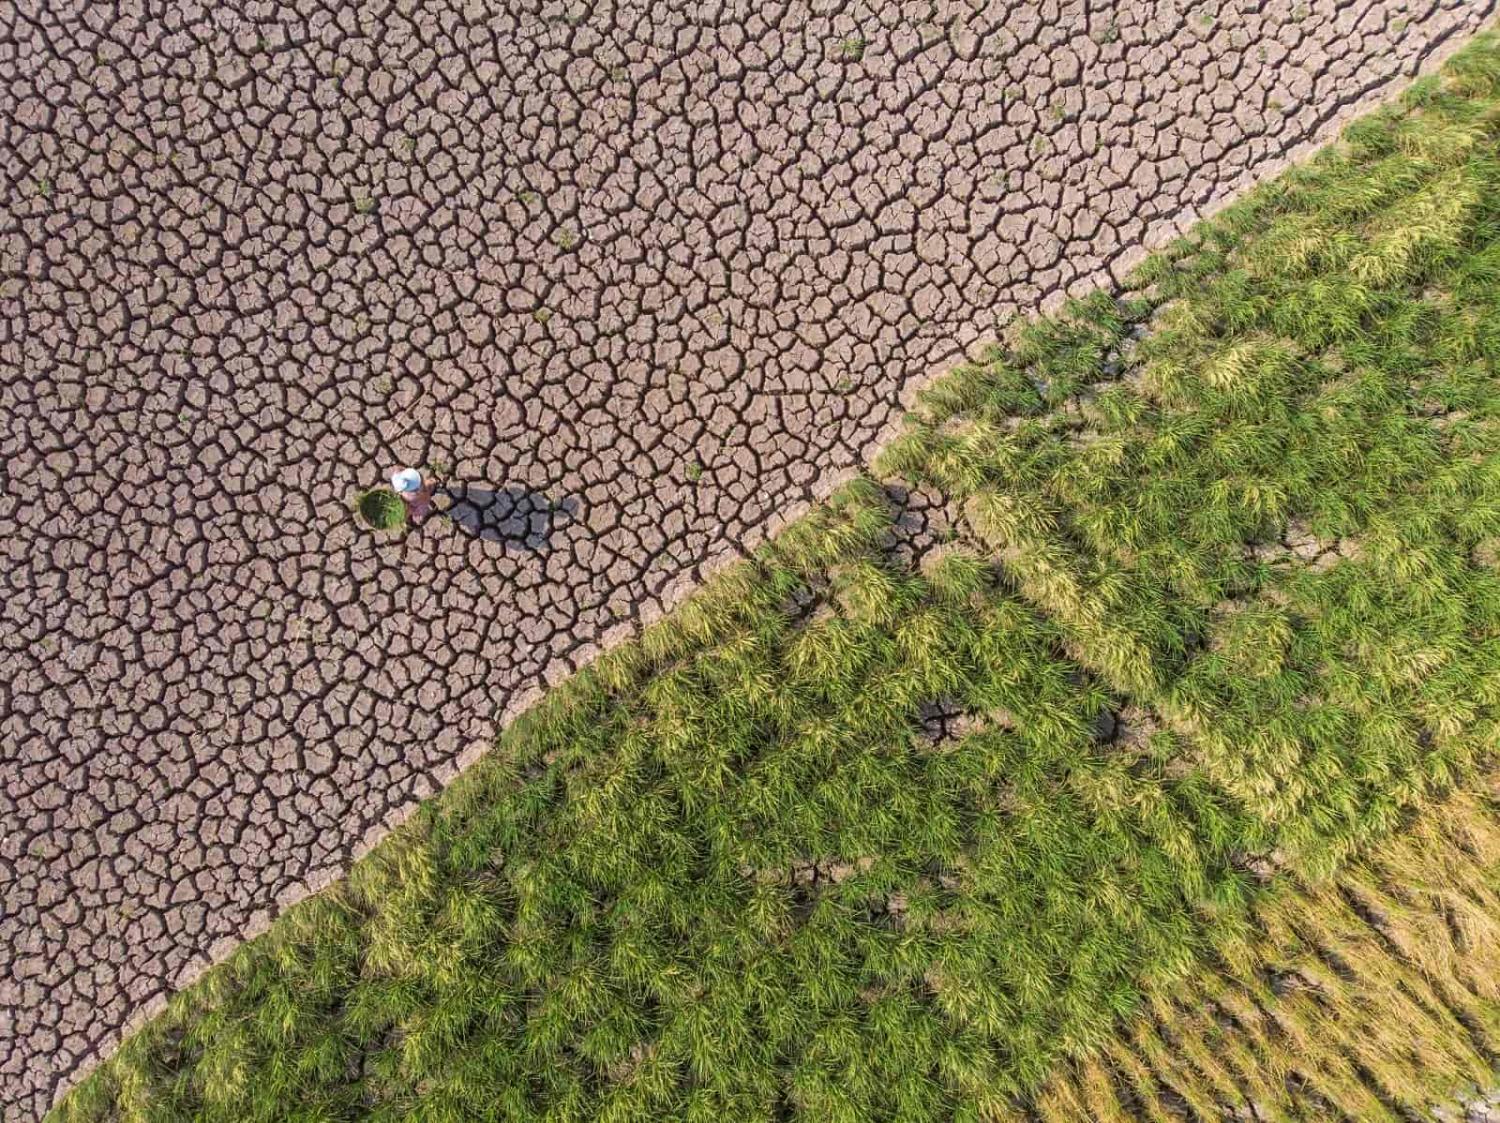 Dry paddy fields are just one result of the current drought in southwestern China, 24 August 2022, Sichuan Province (Huang Zhenghua/VCG via Getty Images)